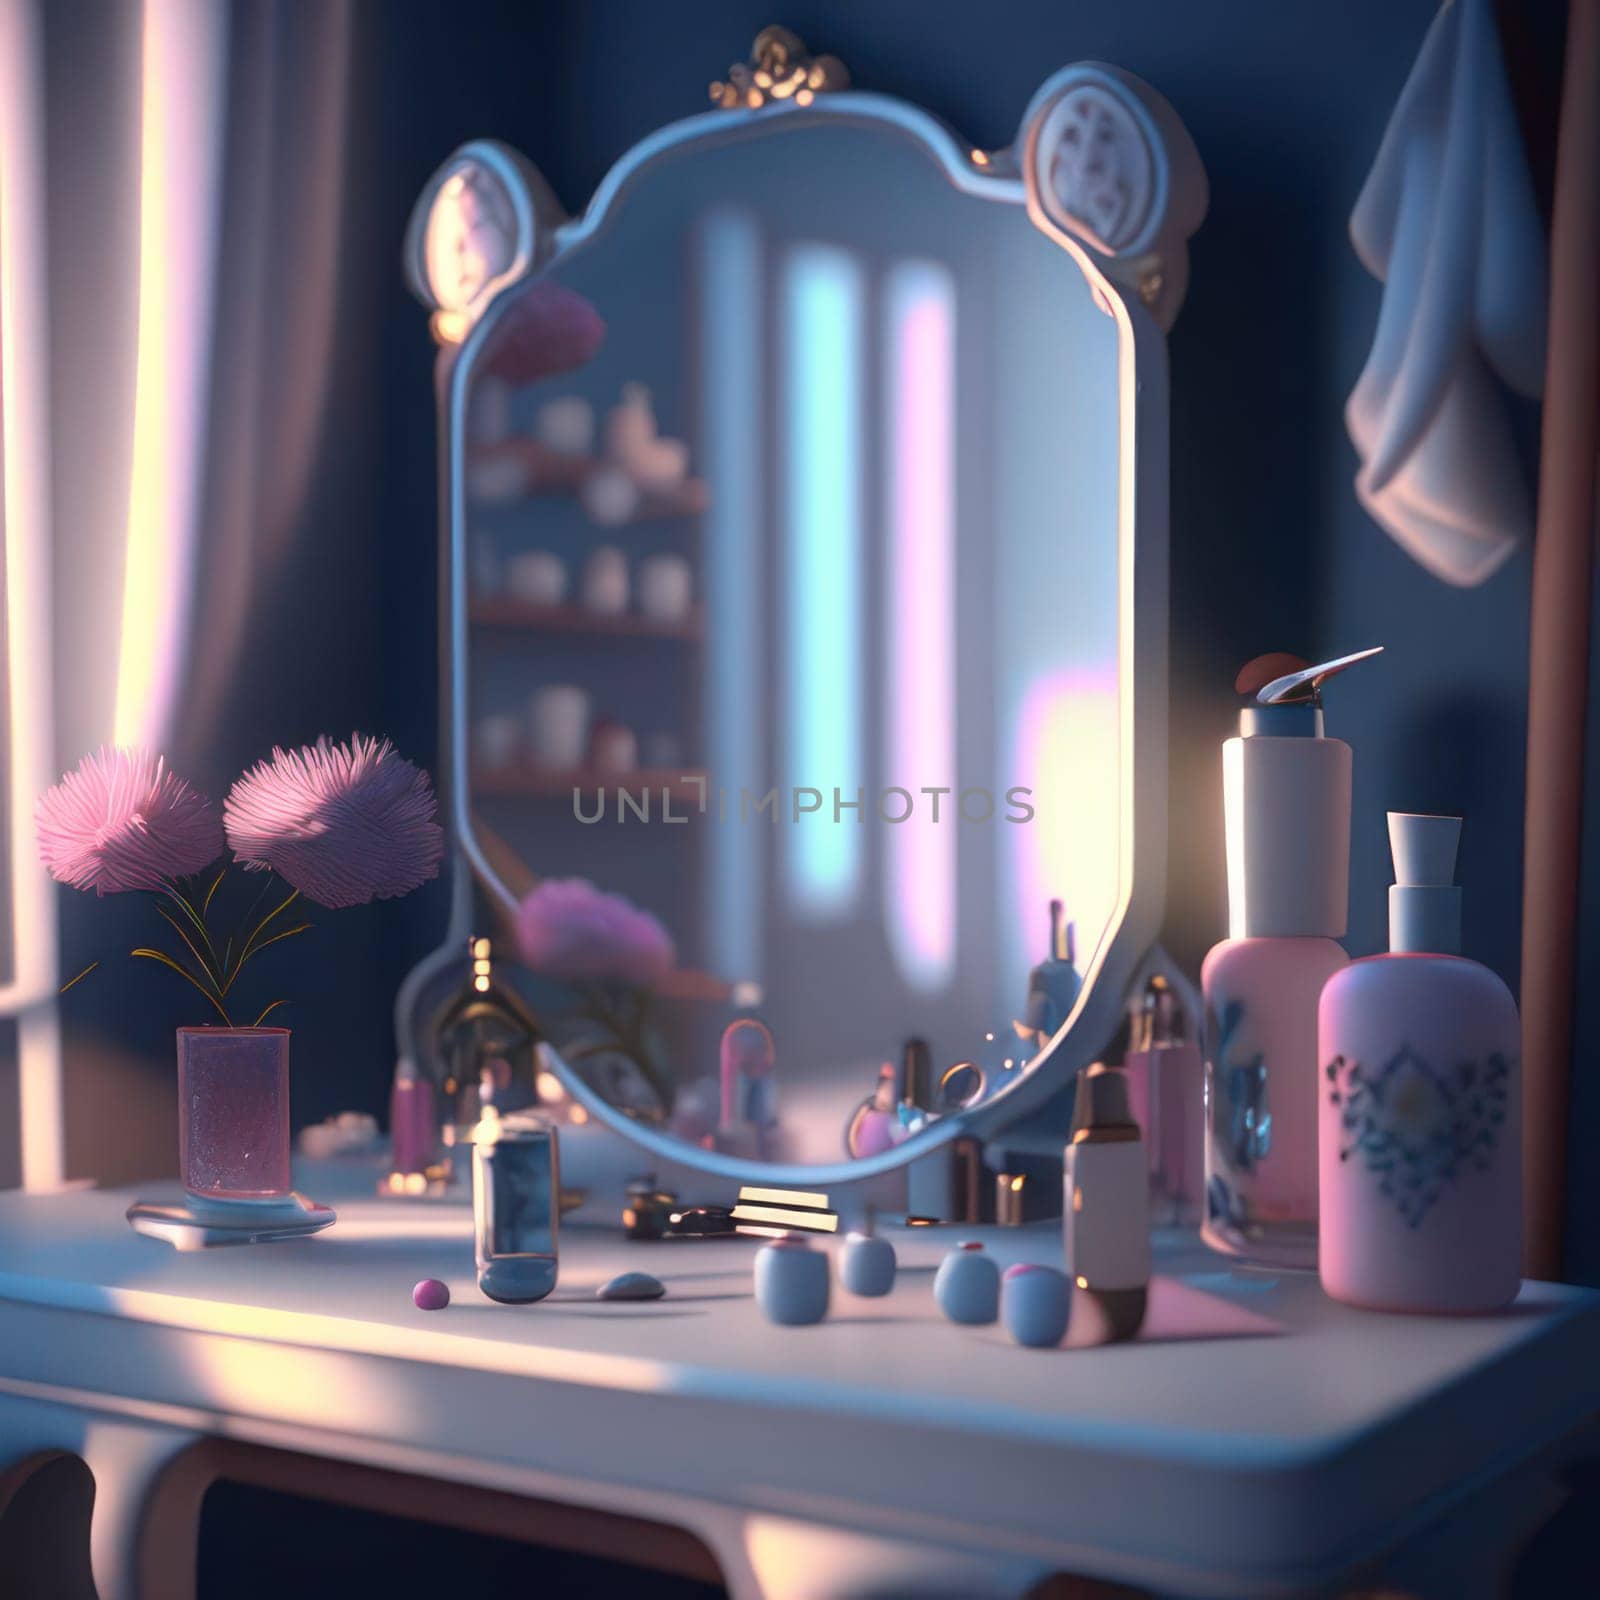 Dressing table by nolimit046